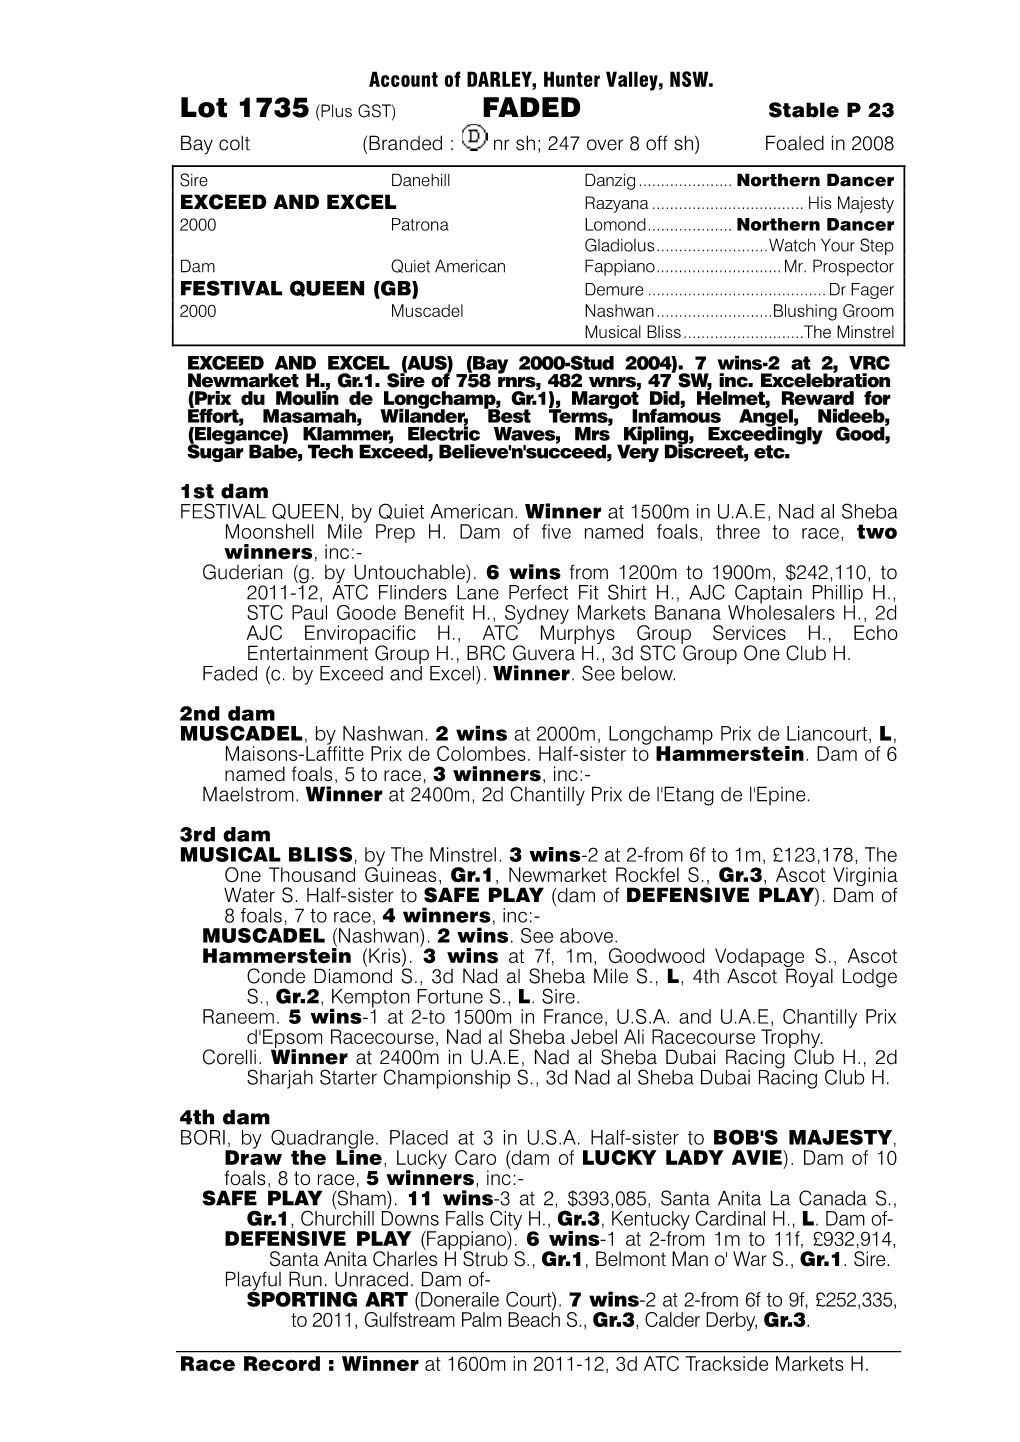 Account of DARLEY, Hunter Valley, NSW. Stable P 23 Bay Colt